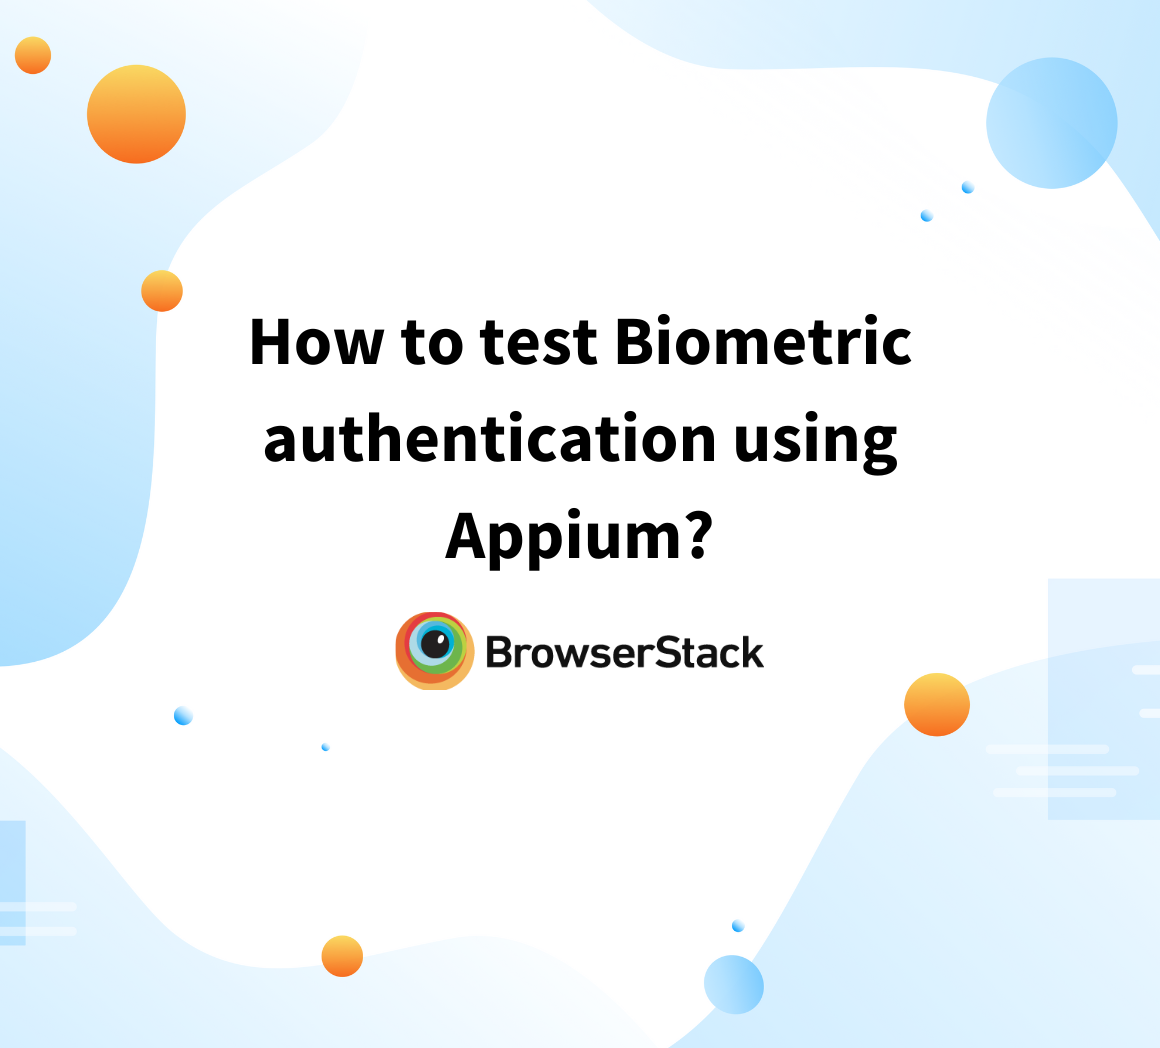 How to test Biometric authentication using Appium